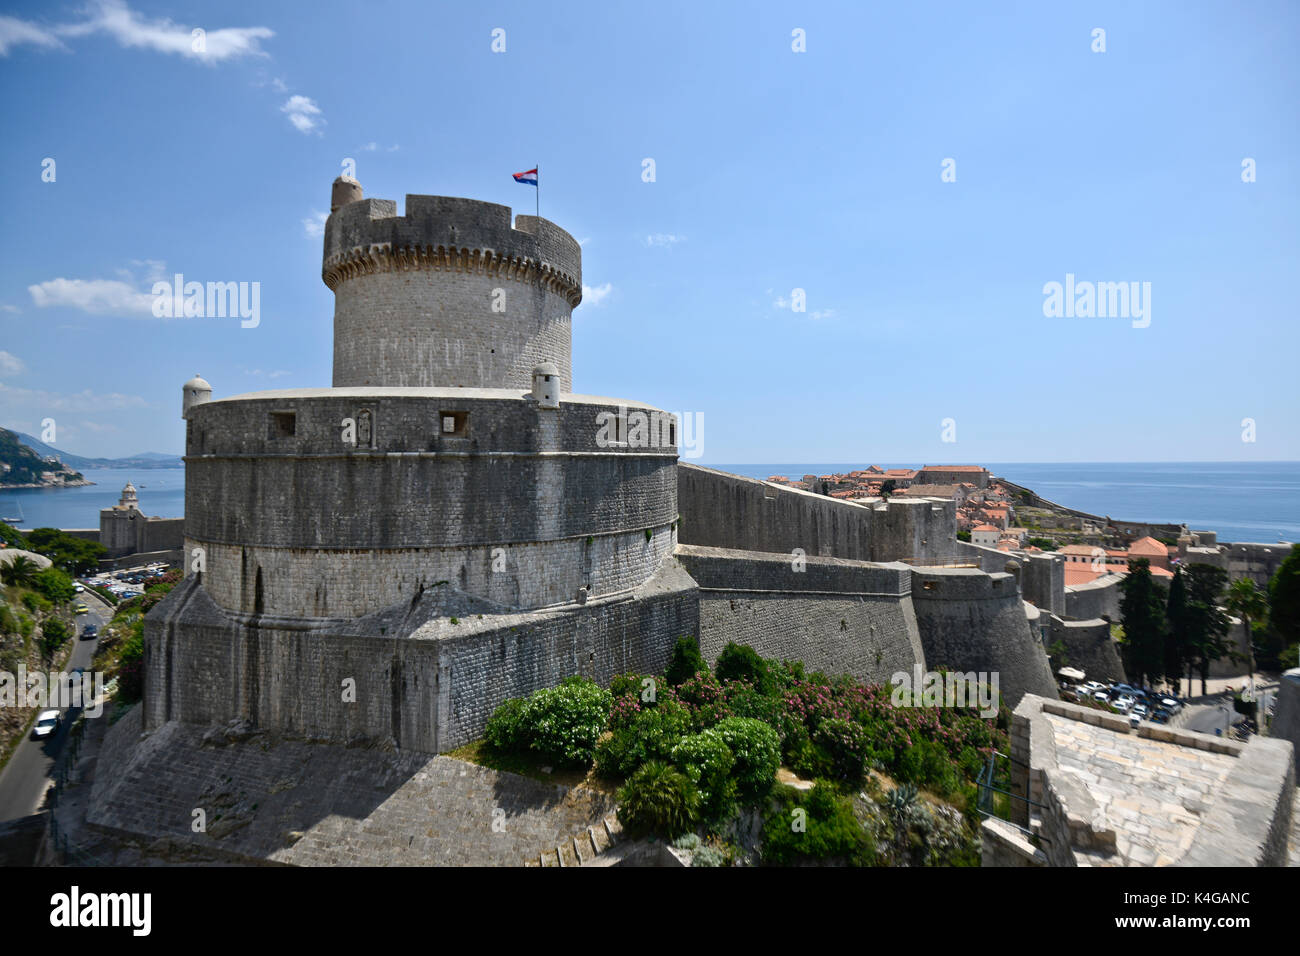 Dubrovnik Old Town wall and defensive tower, Croatia Stock Photo